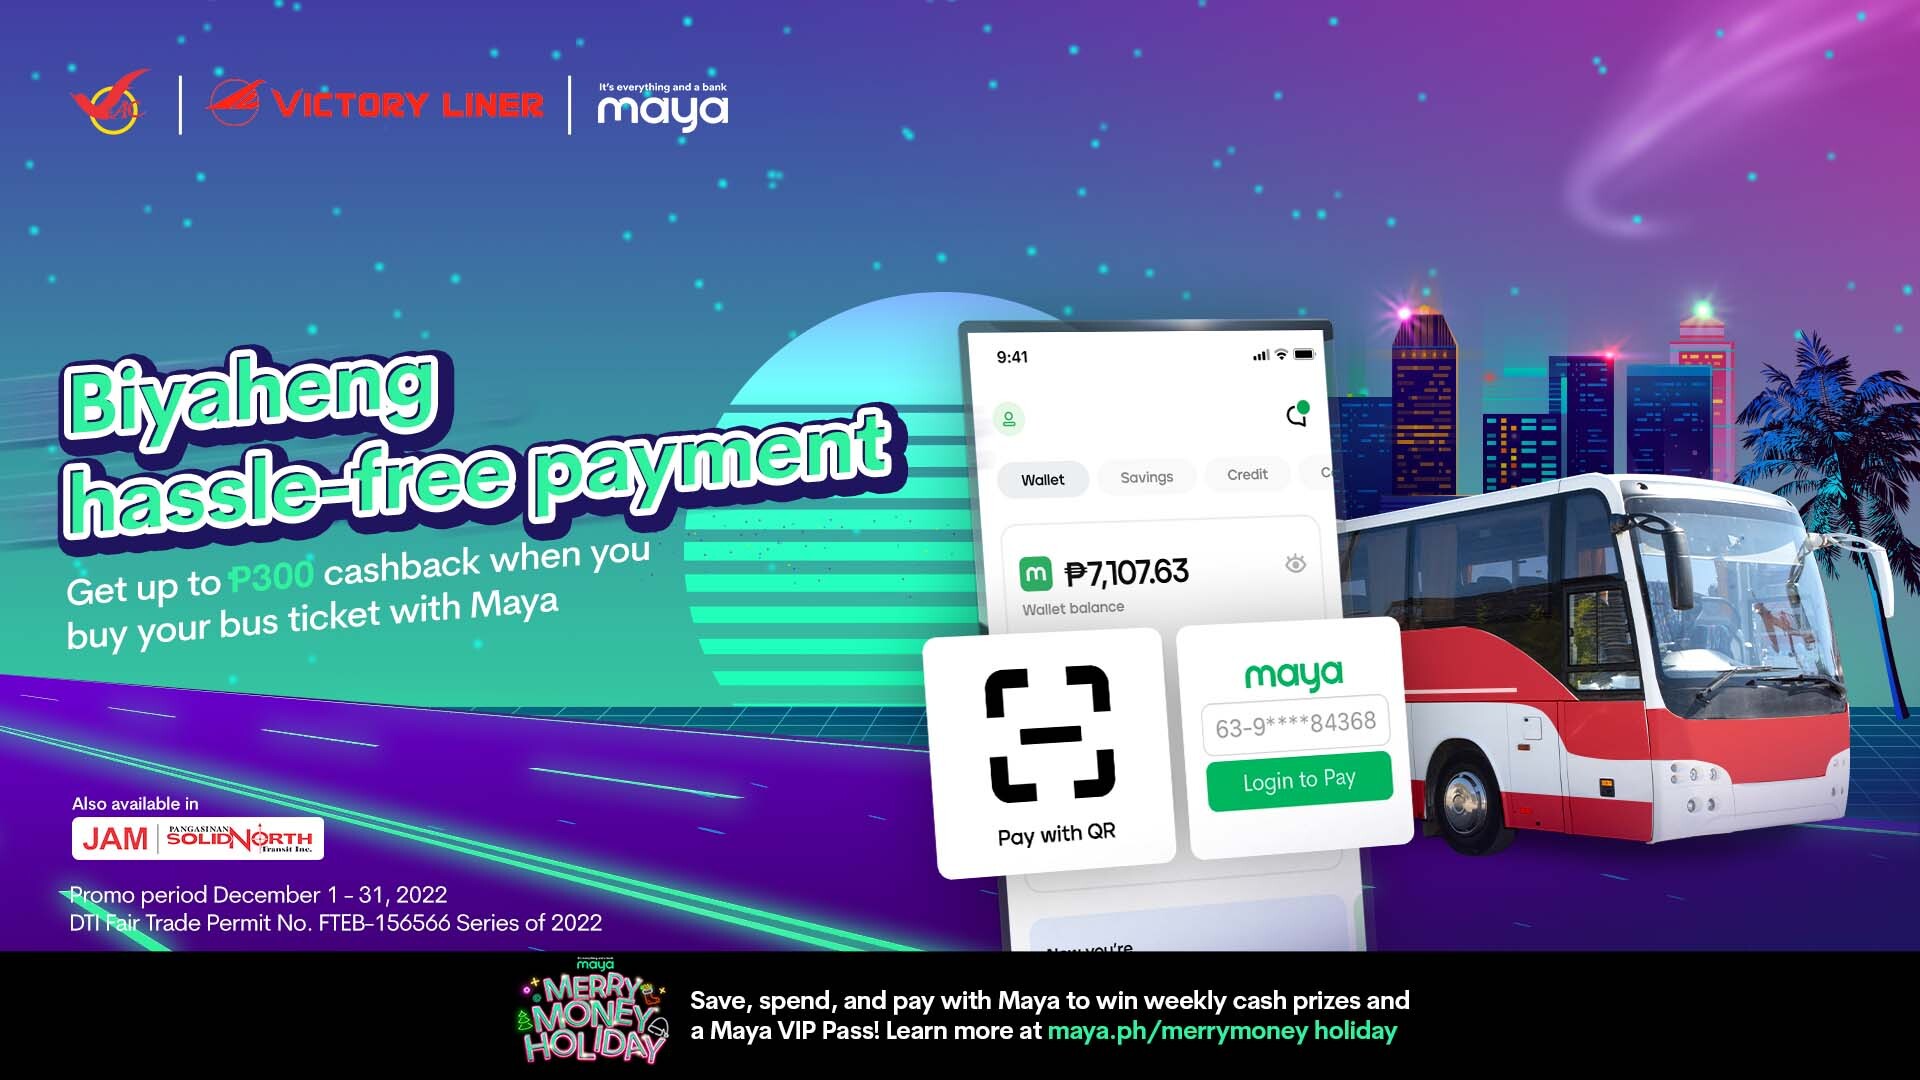 Get 10% cashback when you buy your bus ticket with Maya!